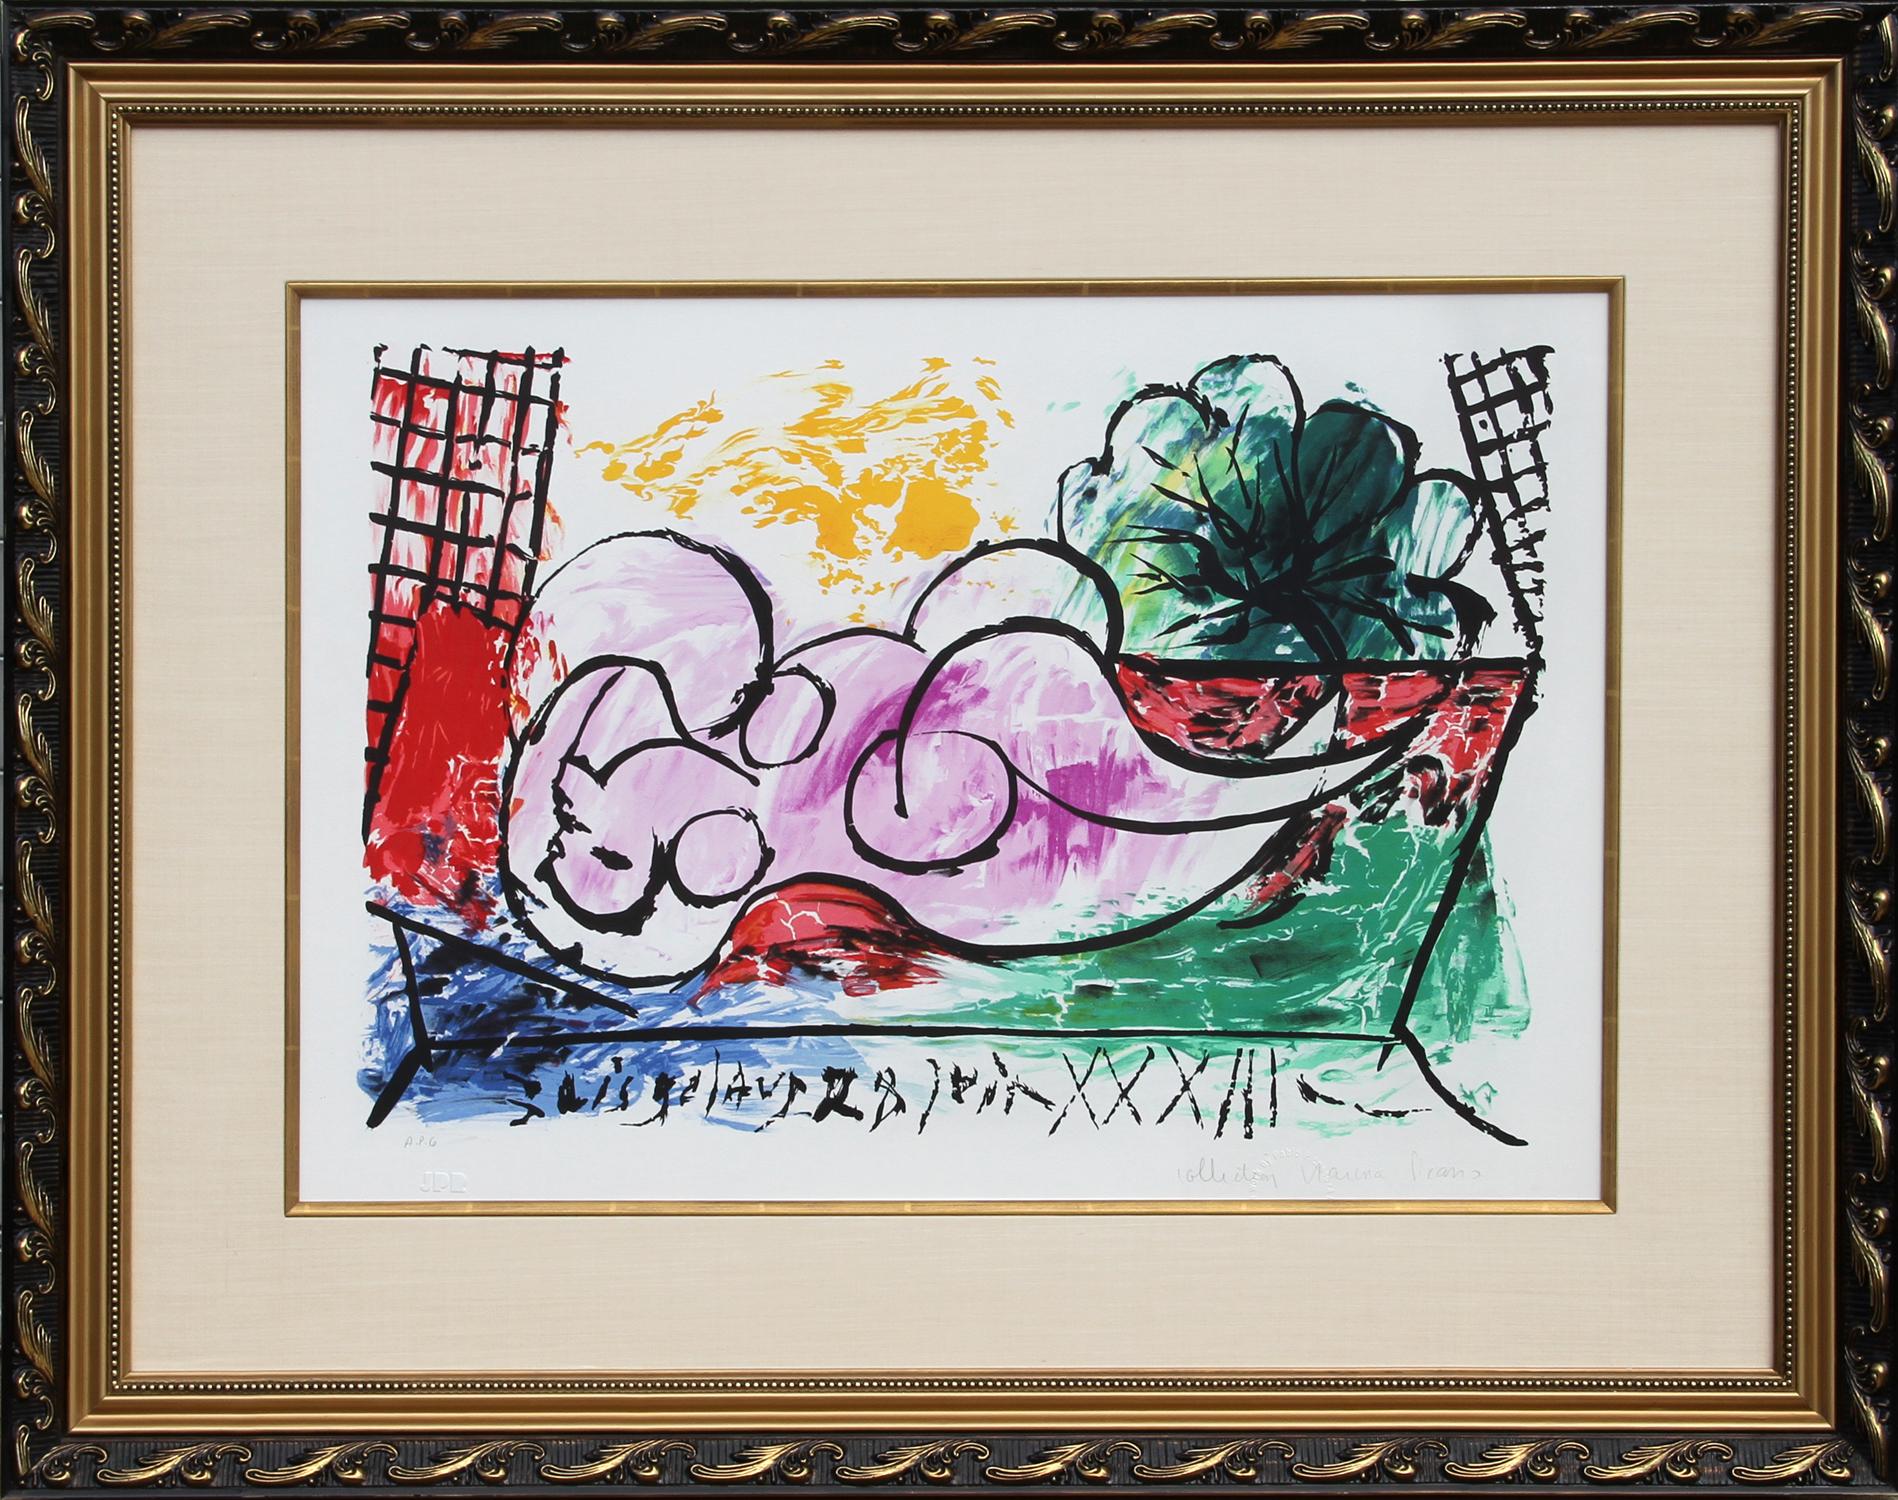 This Pablo Picasso print portrays a nude woman who has fallen asleep. The figure reclines backward toward the viewer, resting on her back. The artist's use of flowing line and the bright, soft colors enliven the composition even while the subject